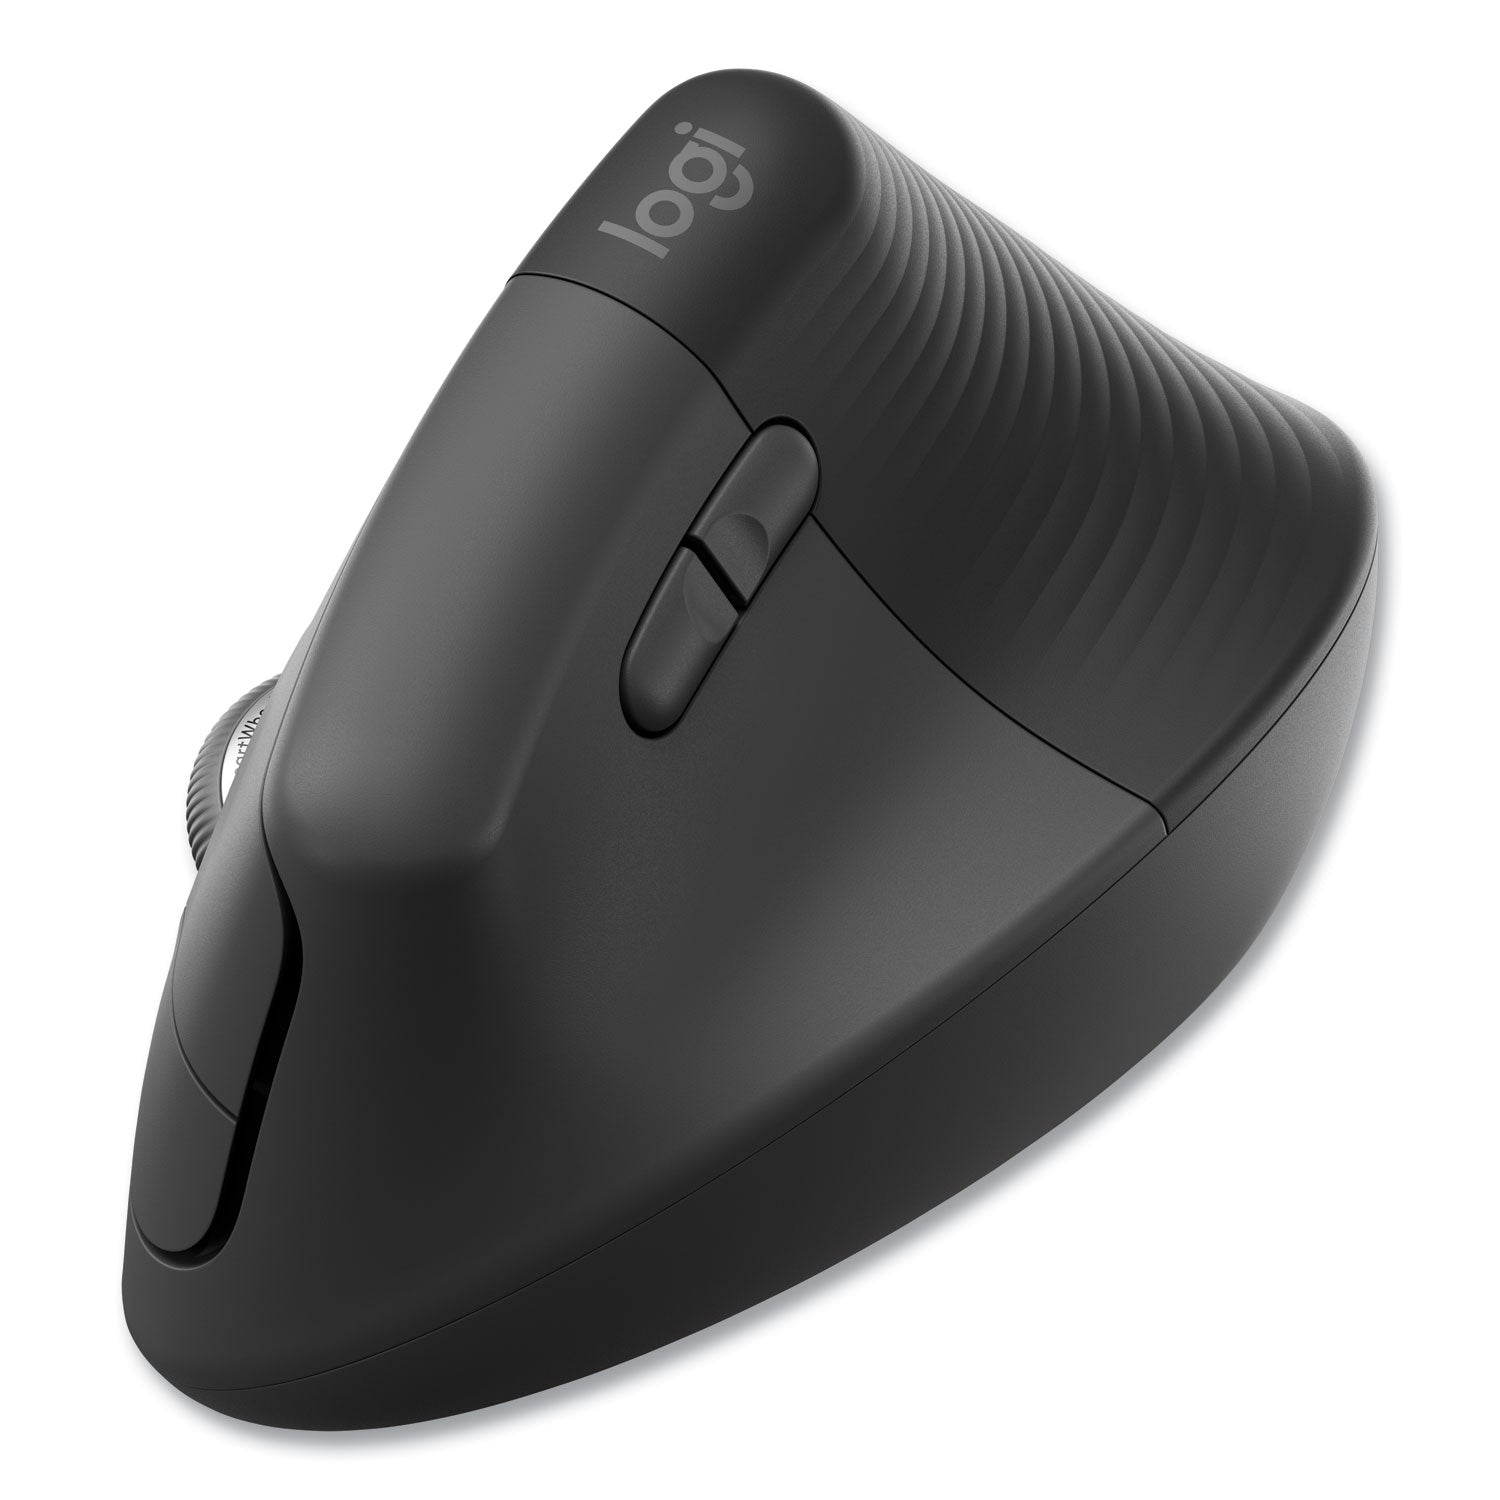 lift-for-business-vertical-ergonomic-mouse-24-ghz-frequency-32-ft-wireless-range-right-hand-use-graphite_log910006491 - 4